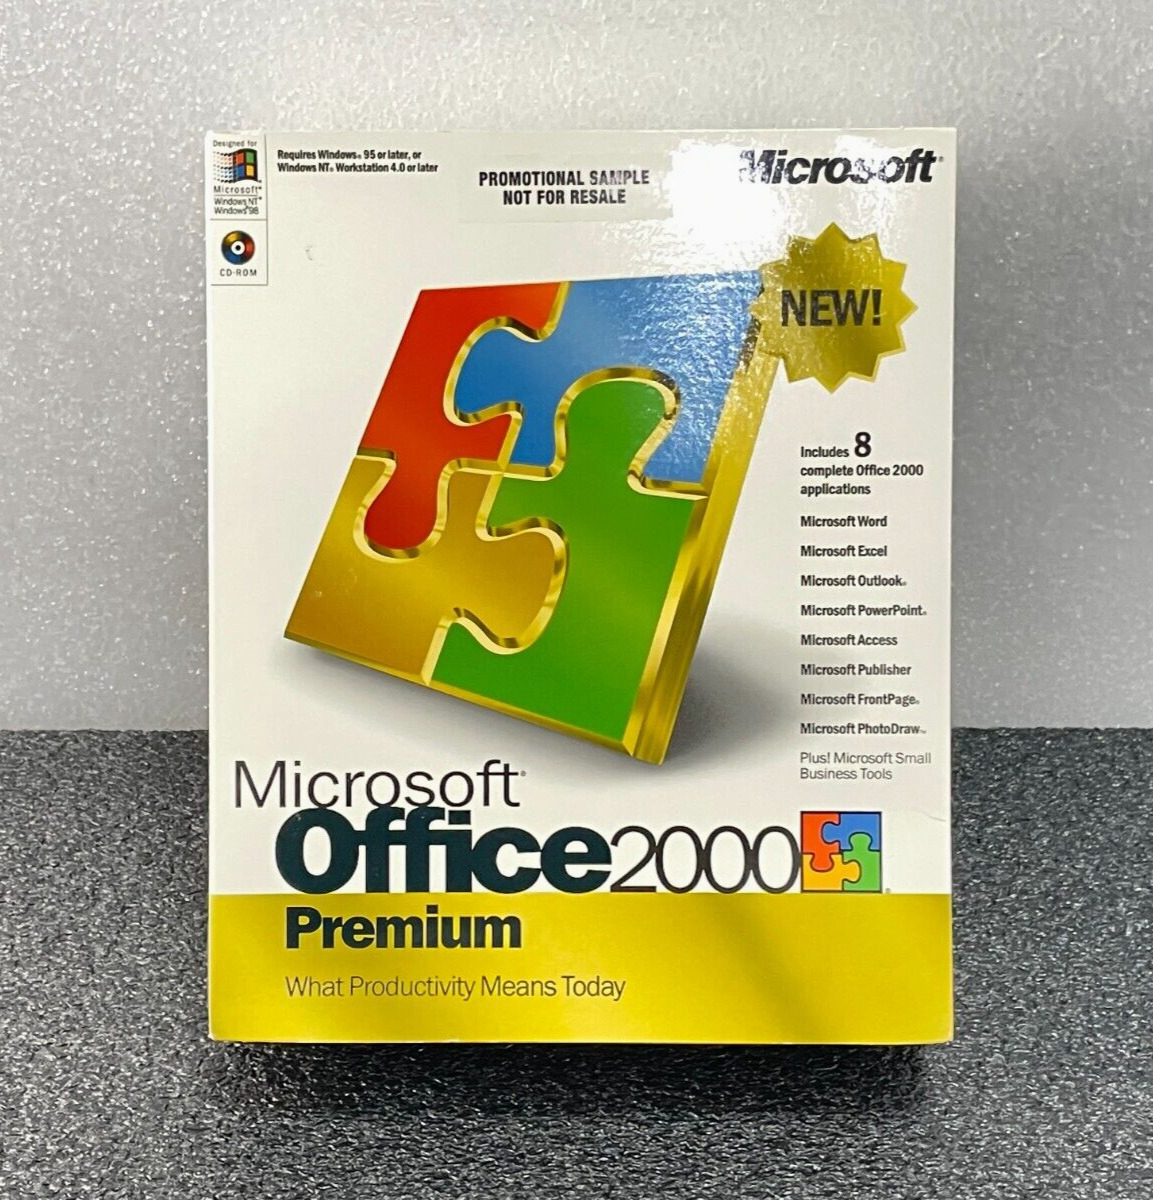 NEW Microsoft Office - (2000 Premium) Applications Sealed Full Box Promotional